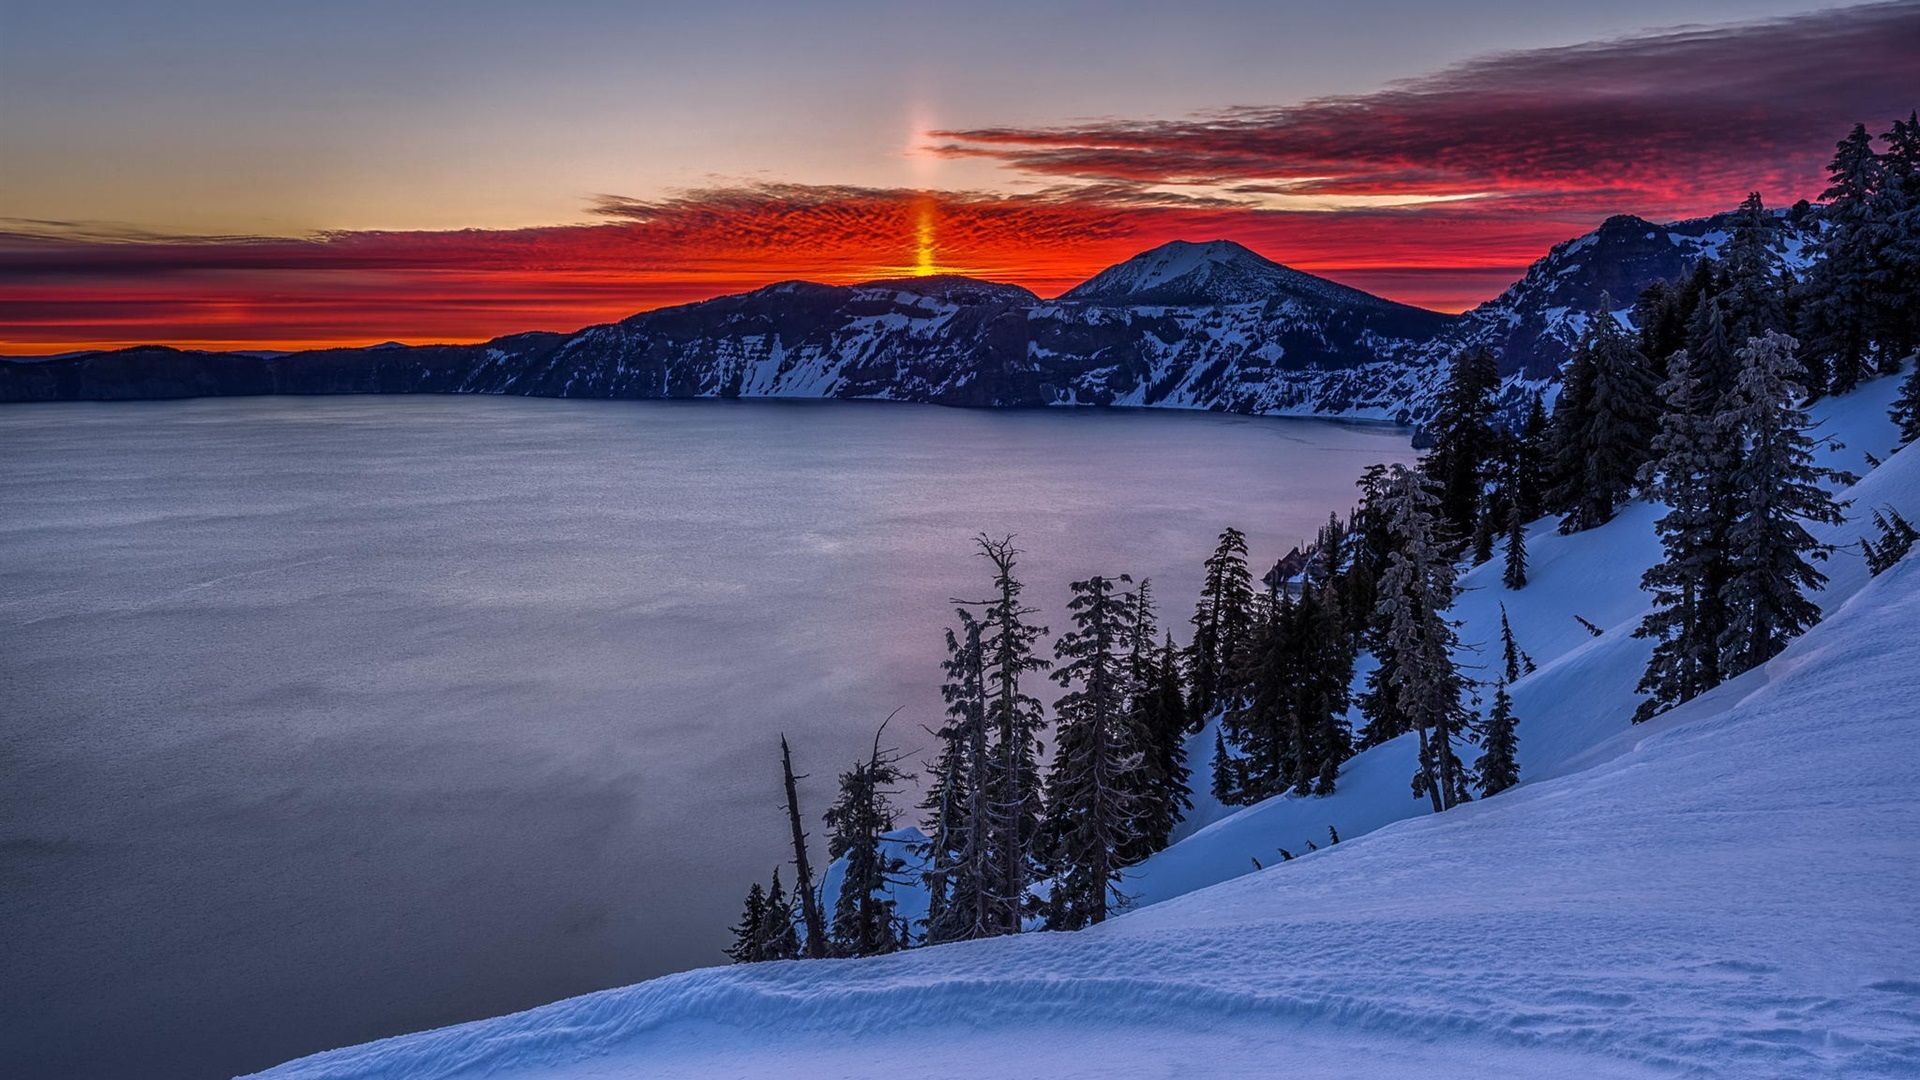 Wallpaper Mountains, Crater Lake, dawn, snow, winter, sunrise 1920x1080 Full HD 2K Picture, Image